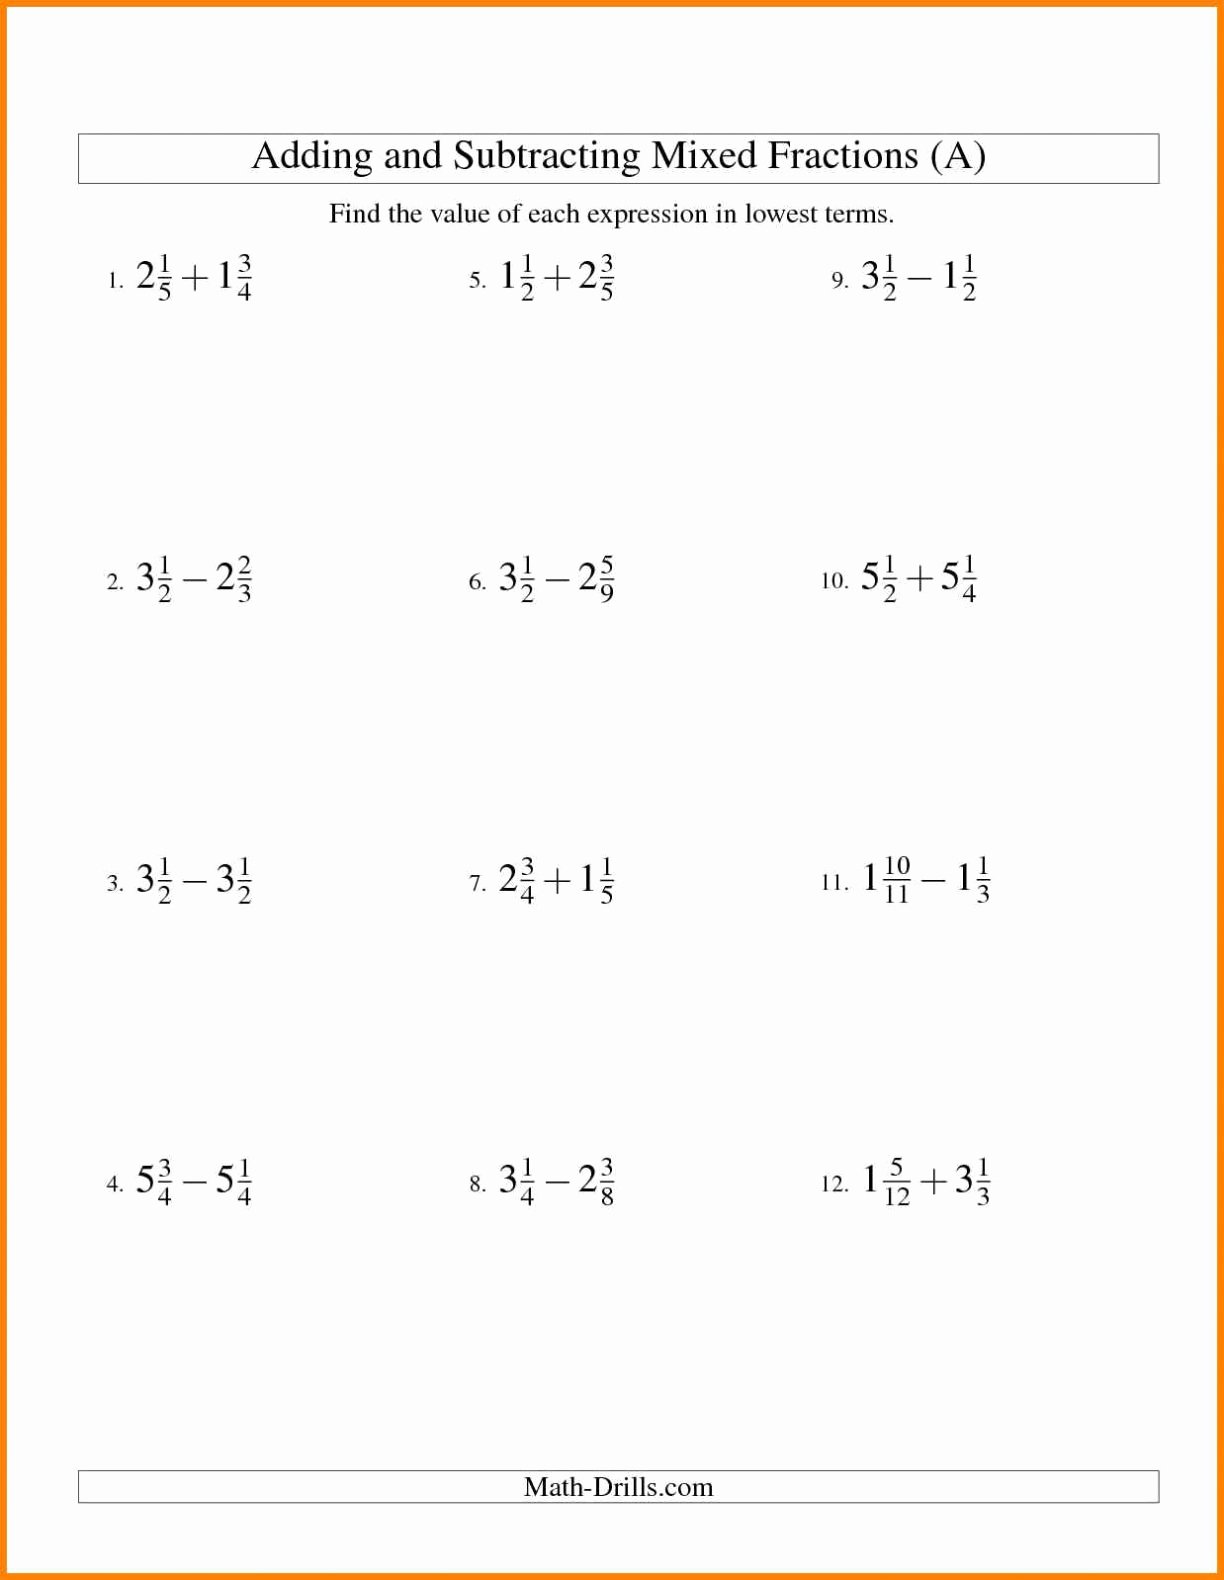 Subtracting Mixed Numbers Worksheet Fresh Math Problems for 9th Graders Worksheets Worksheet